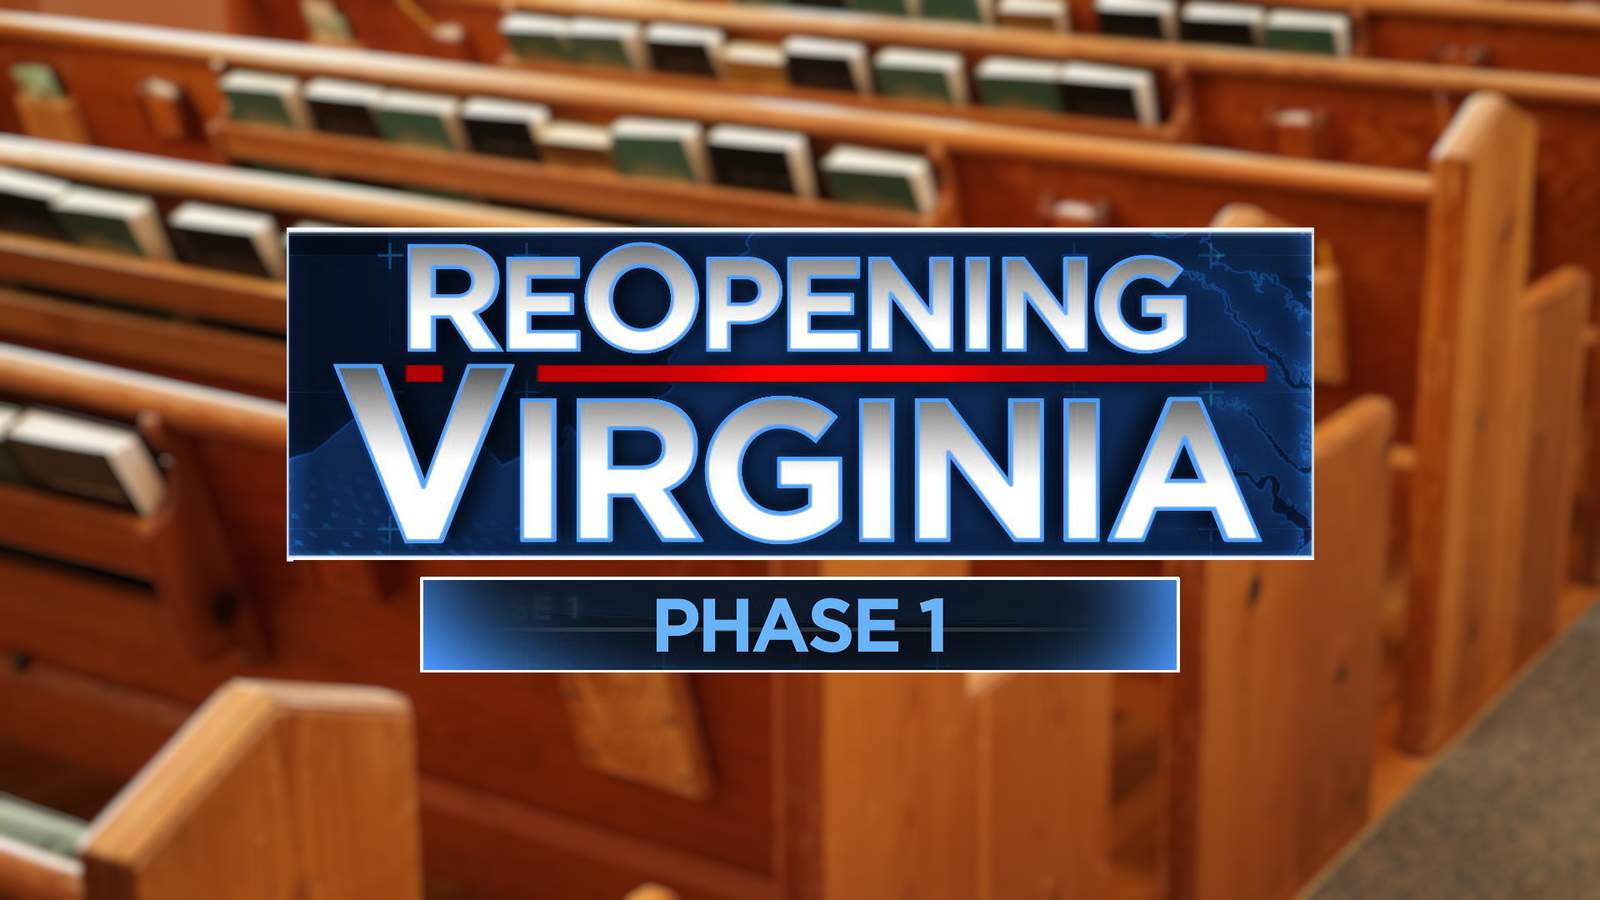 Virginians will be required to wear masks while attending church